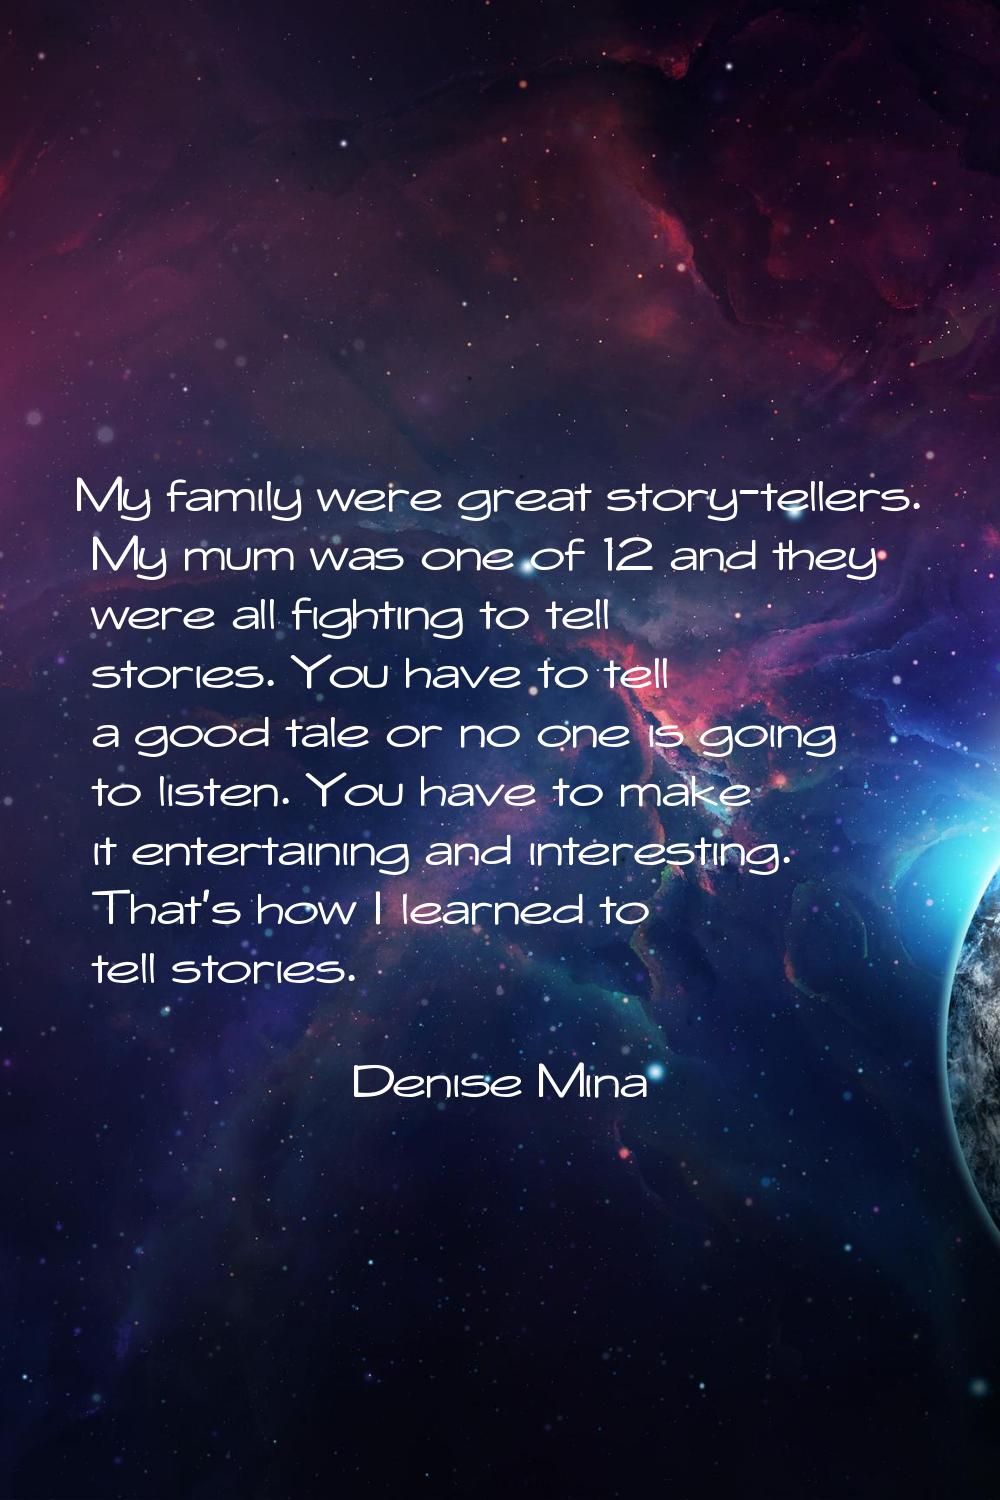 My family were great story-tellers. My mum was one of 12 and they were all fighting to tell stories